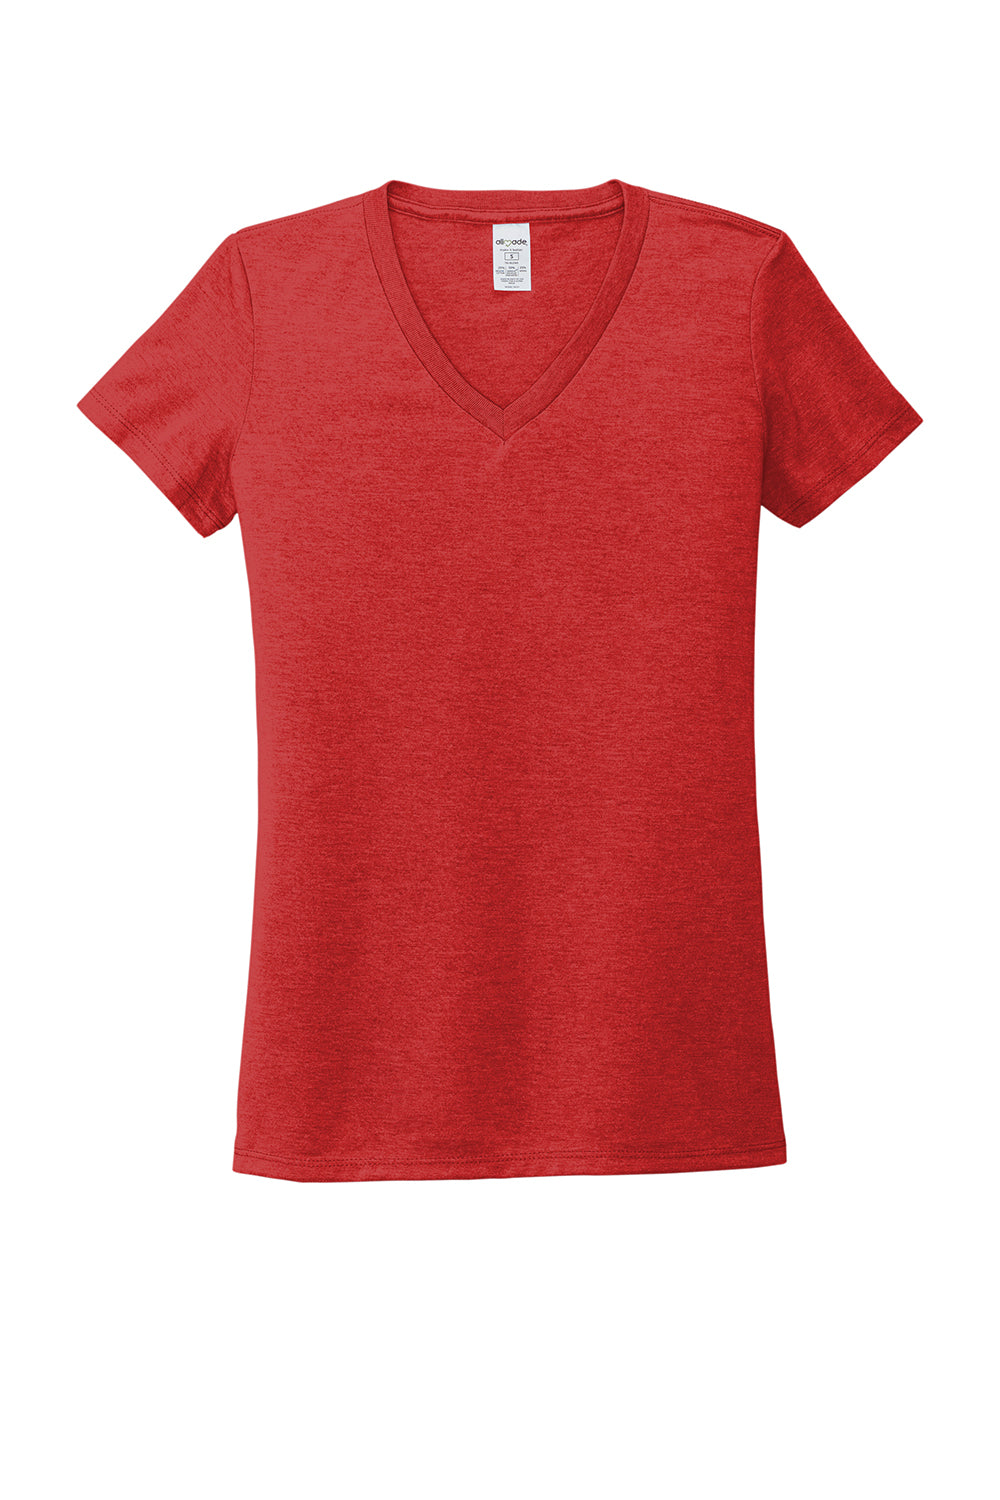 Allmade AL2018 Womens Short Sleeve V-Neck T-Shirt Rise Up Red Flat Front